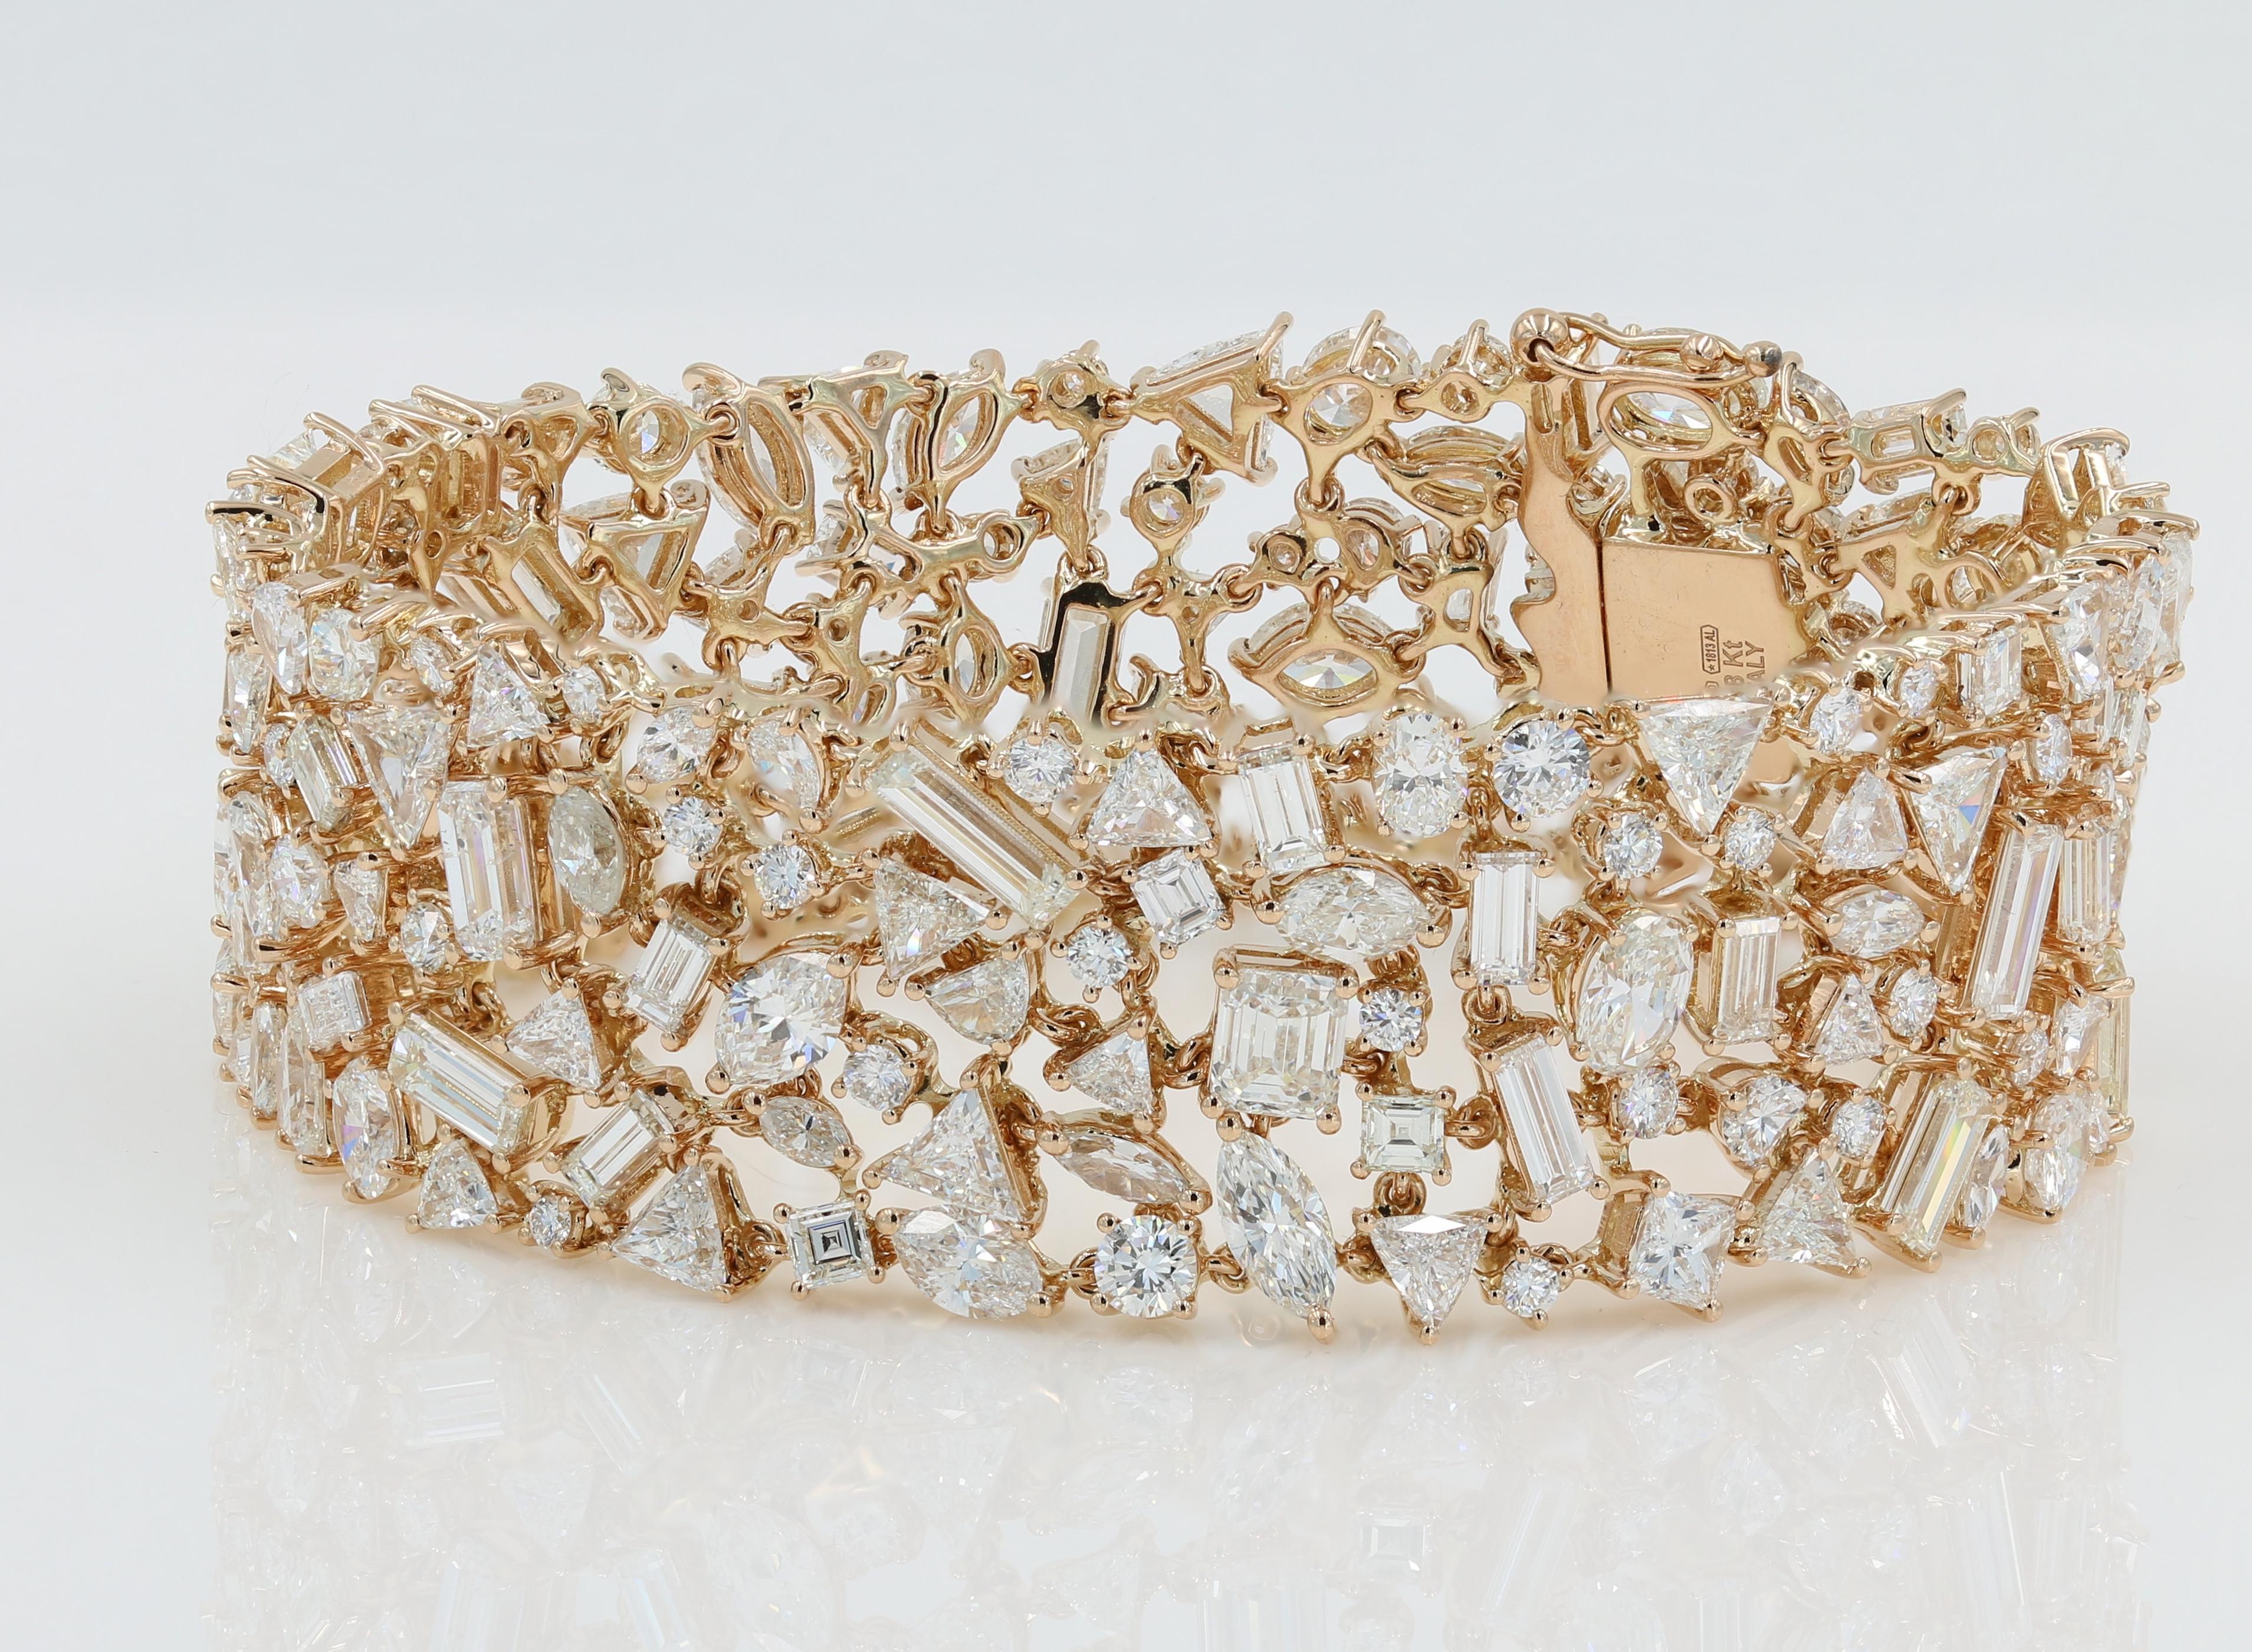 Lester Lampert Diamond Cluster Bracelet in 18Kt RG with over 30Ct of Diamonds im Zustand „Neu“ in Chicago, IL